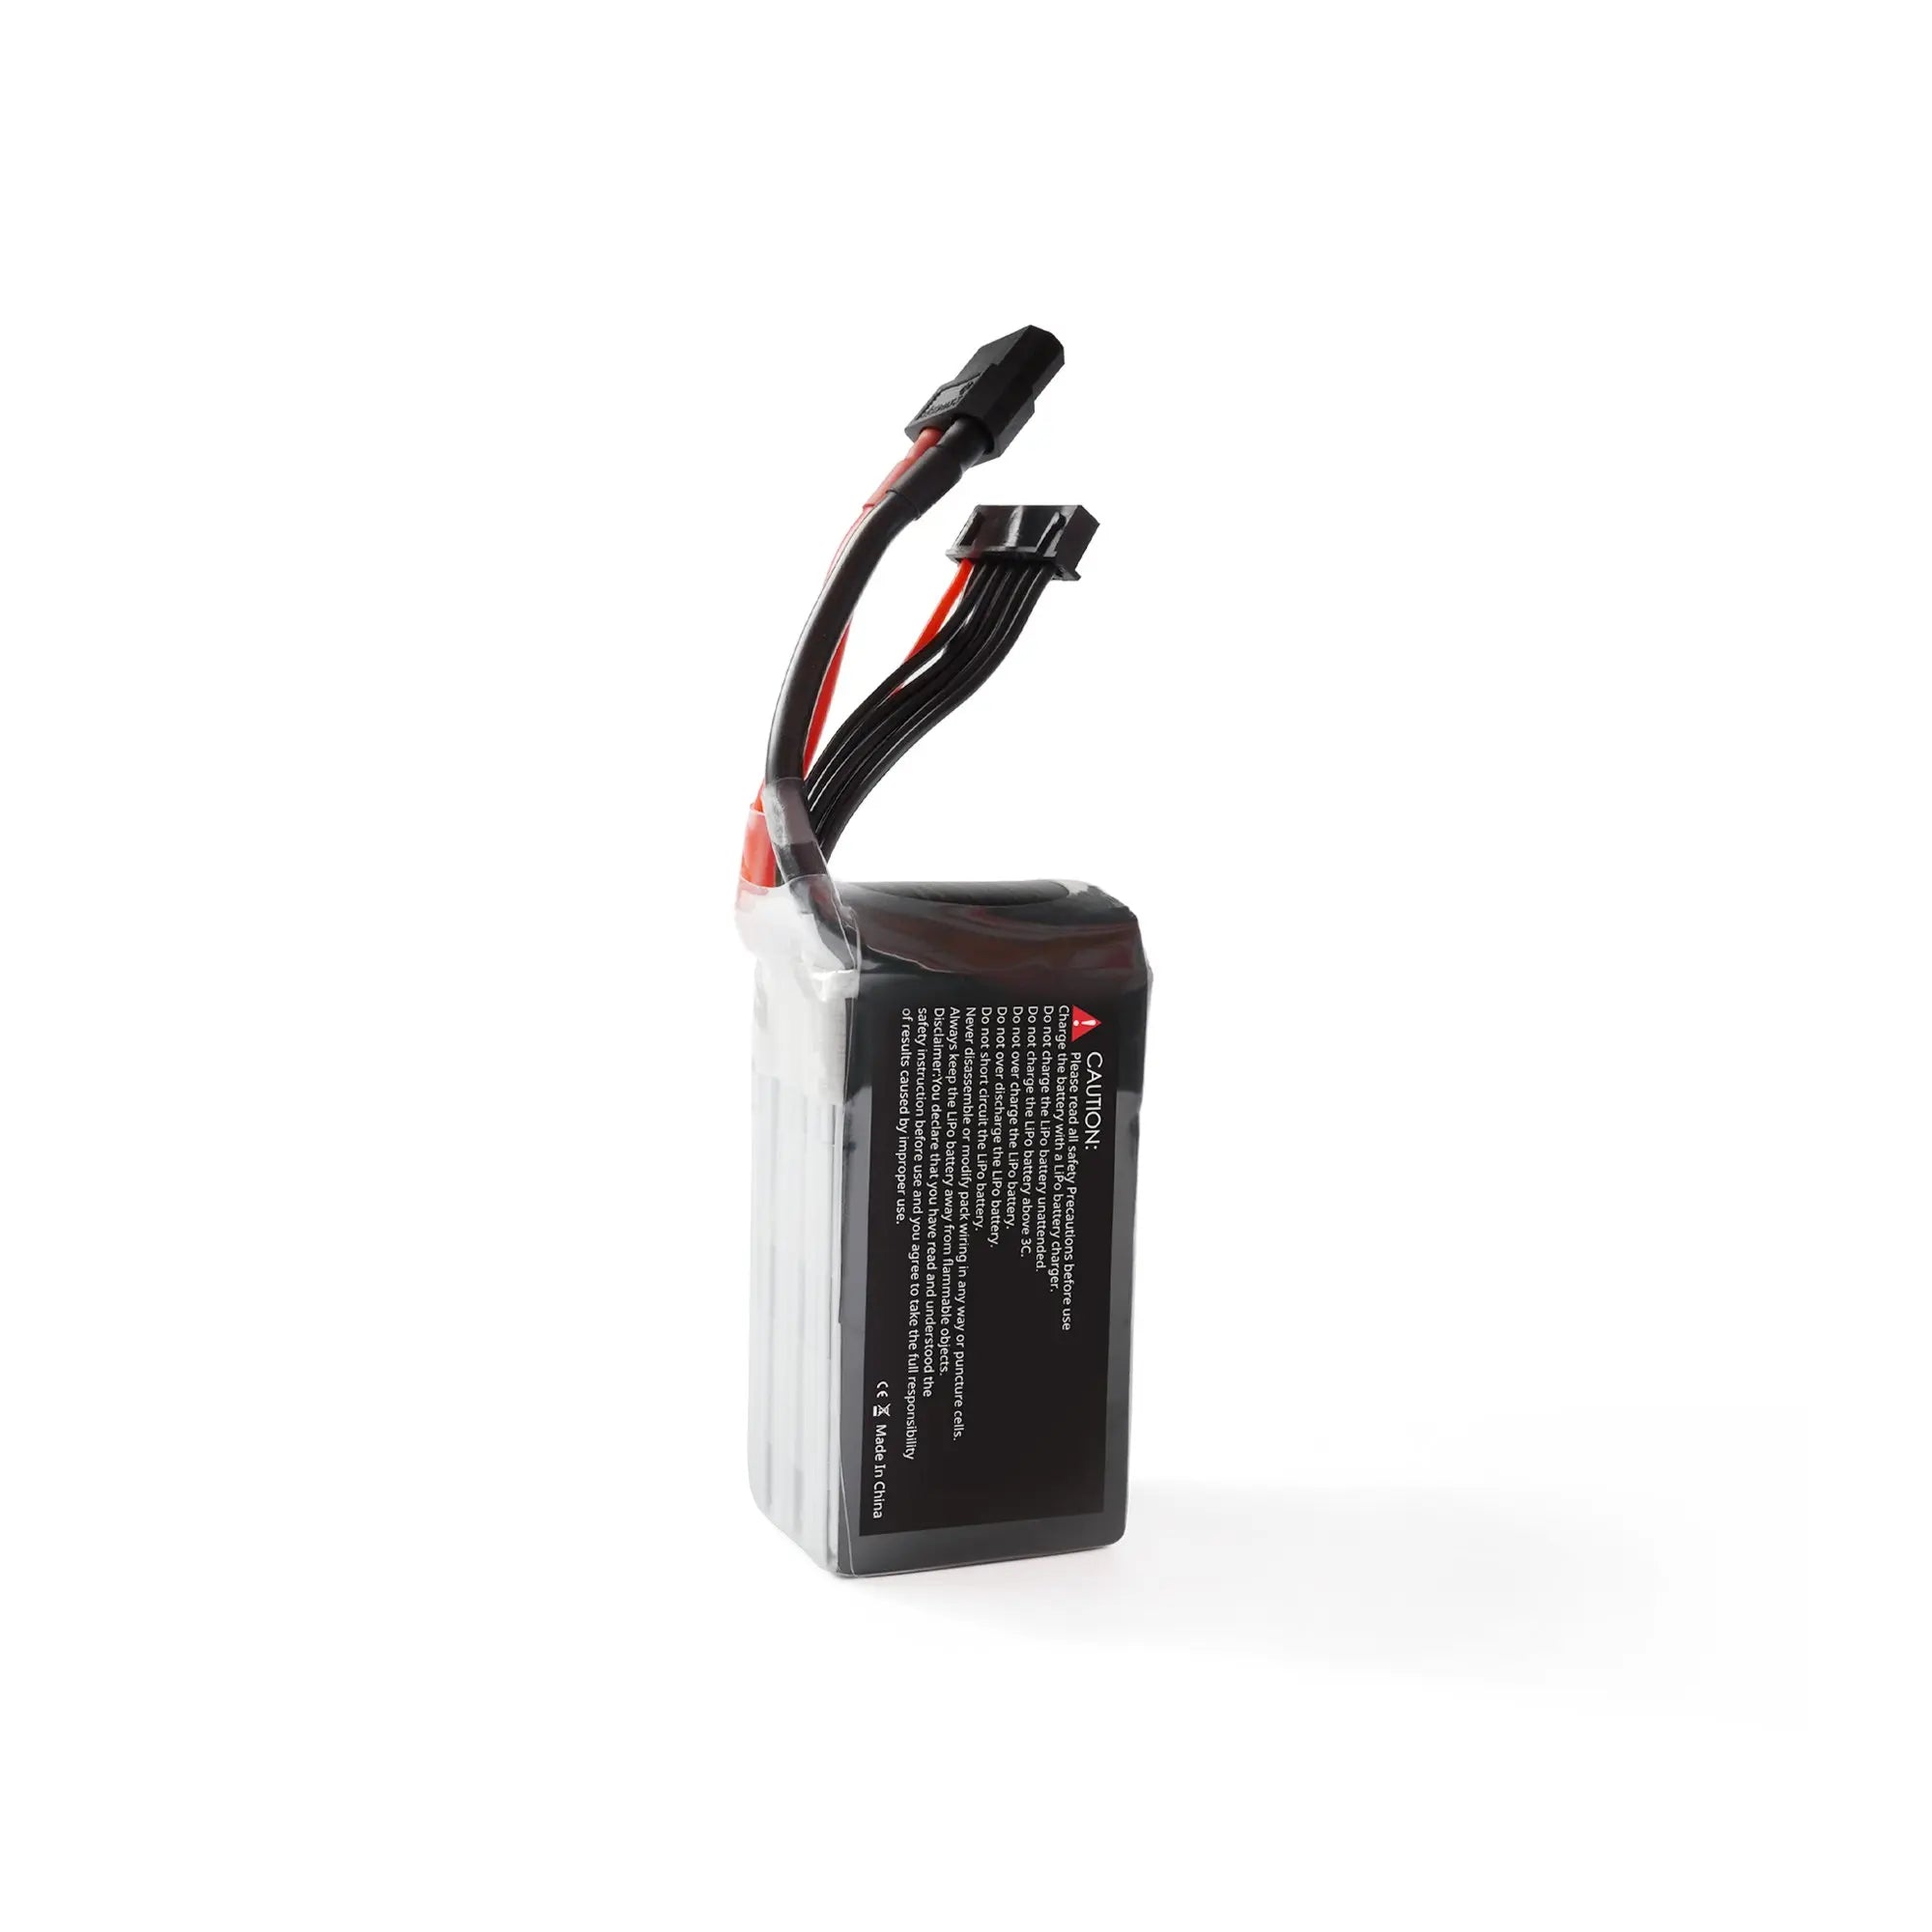 GEPRC Storm 6S 1050mAh 120C Lipo FPV Battery, Battery capacity is quite sufficient